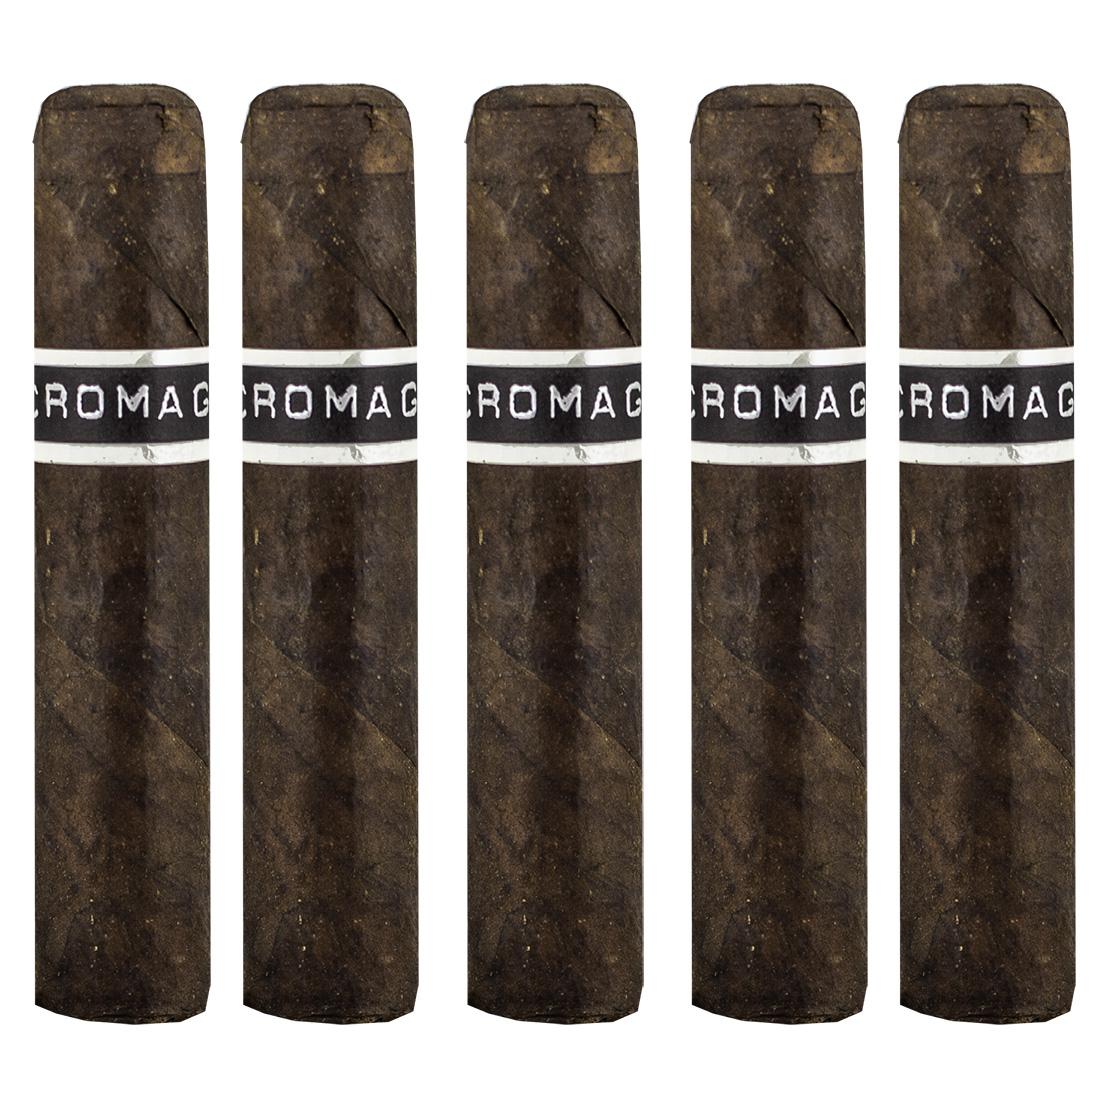 CroMagnon PA Knuckle Dragger Cigar - 5 Pack